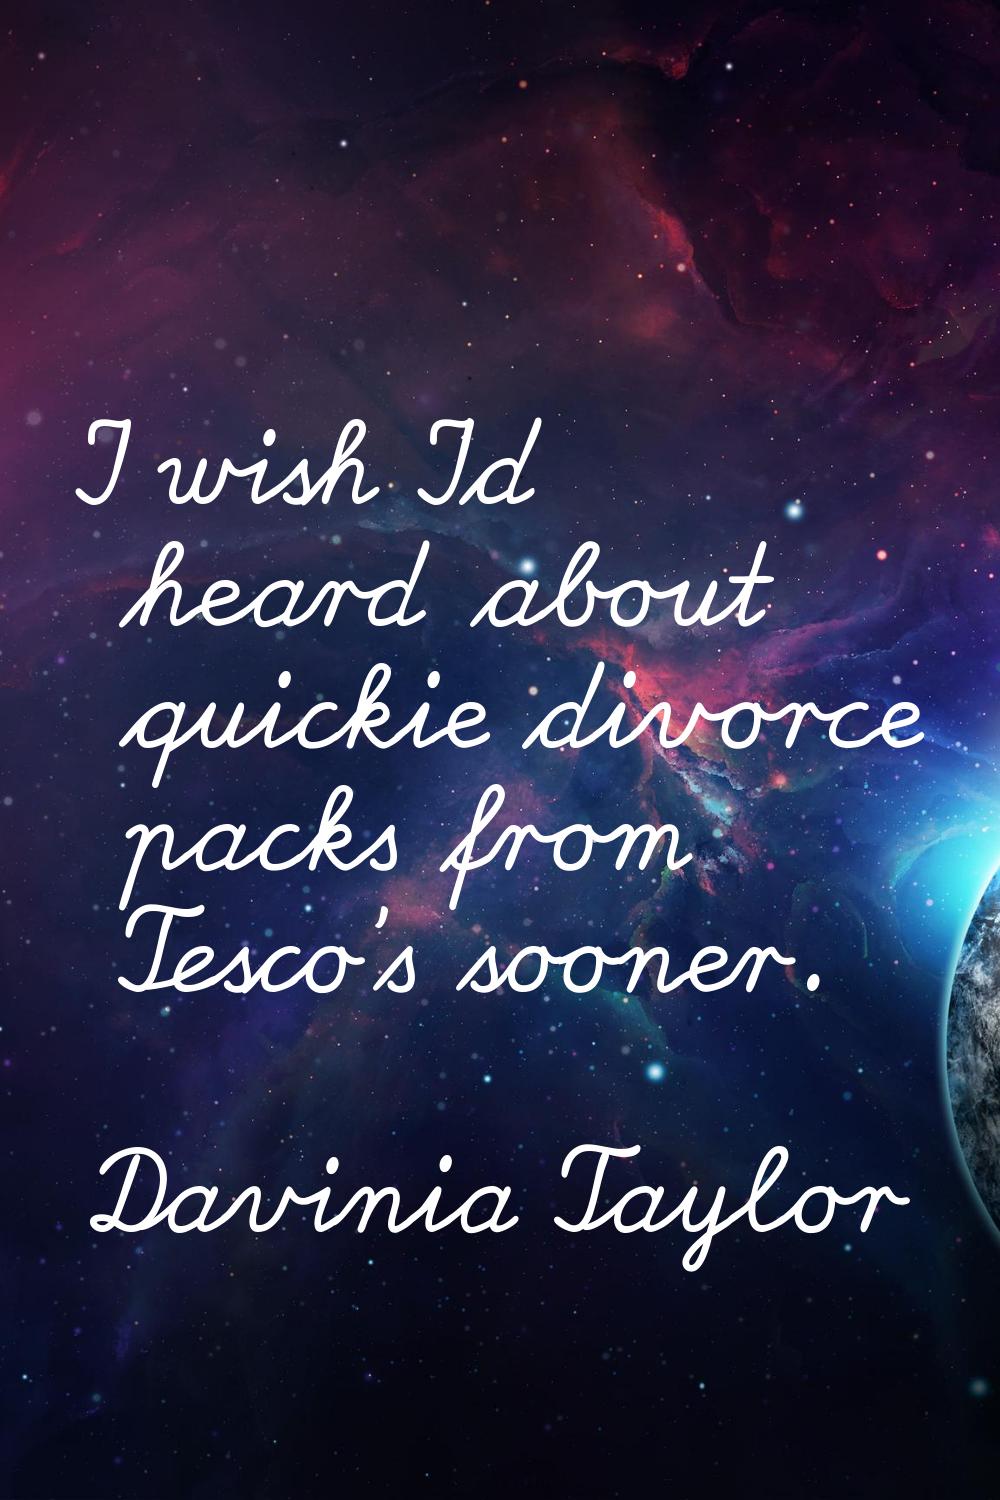 I wish I'd heard about quickie divorce packs from Tesco's sooner.